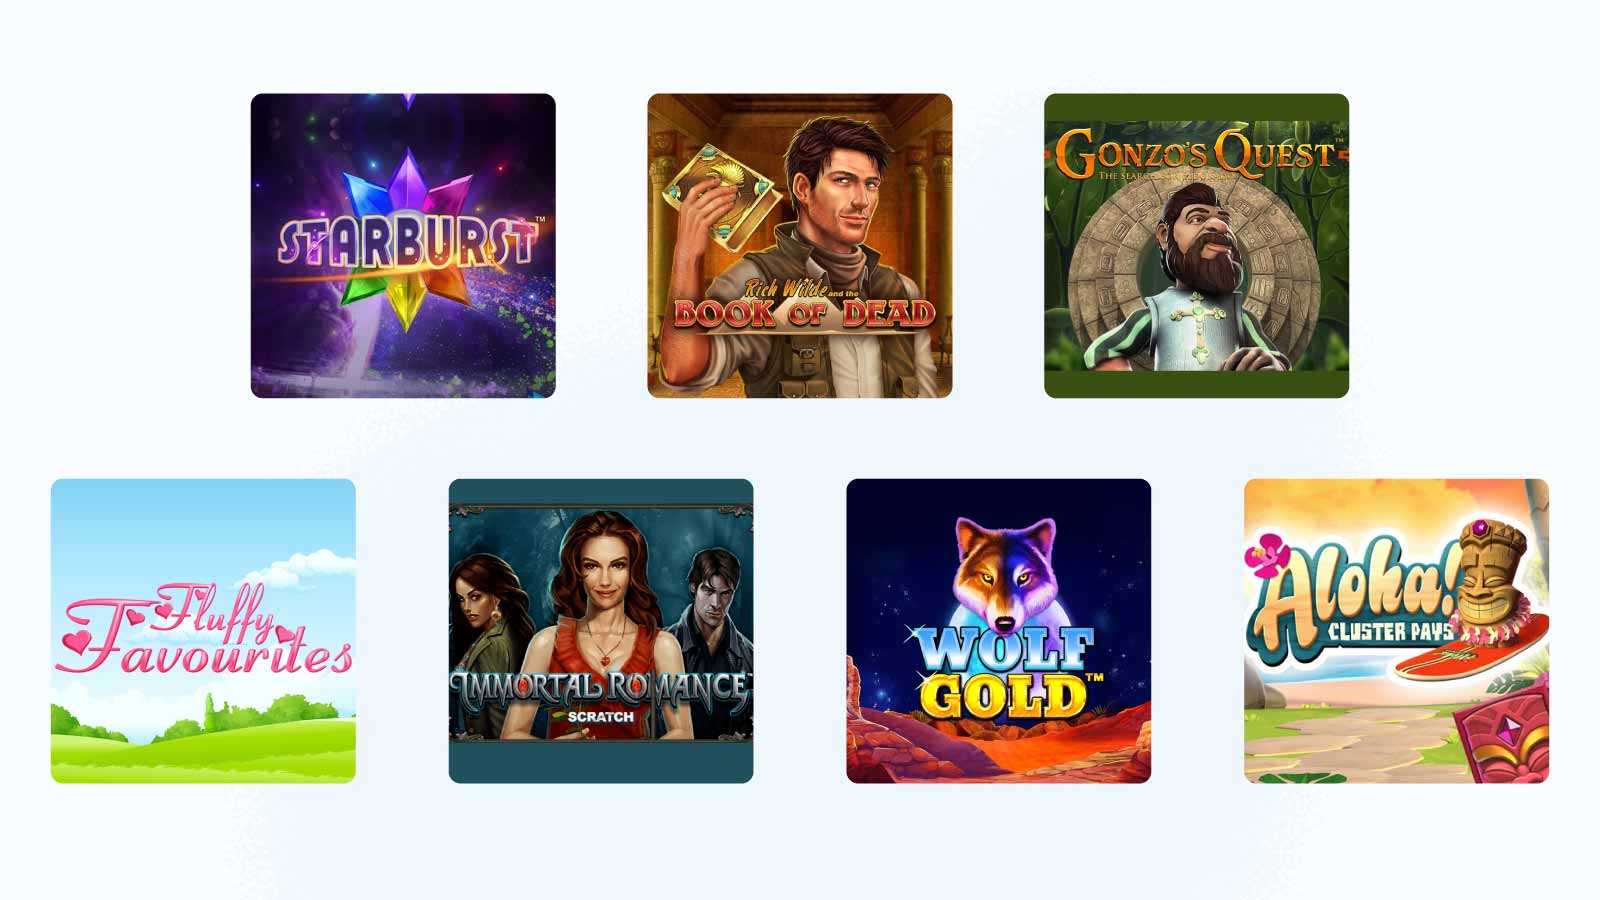 What are the best slot games for free spins Ireland